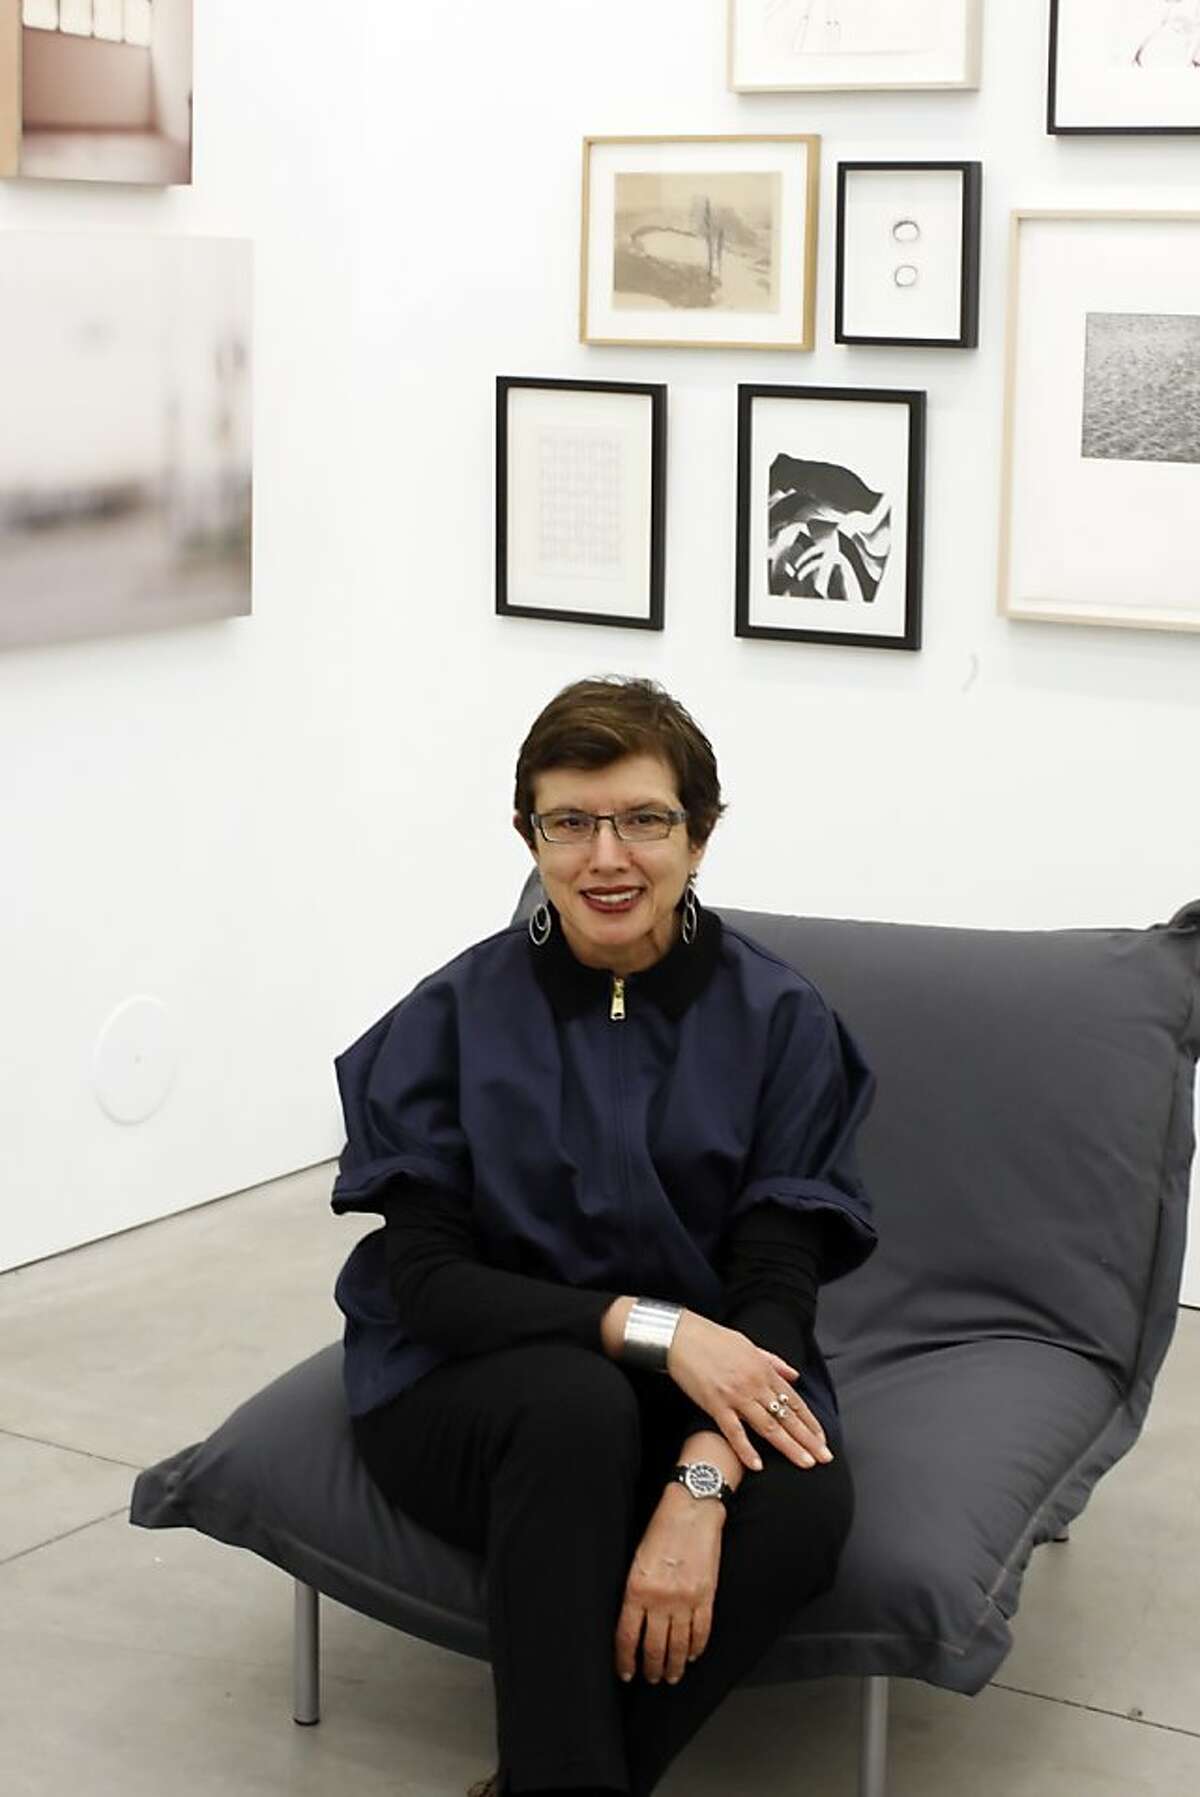 Leonore Pereira at the privet family gallery in San Francisco, Ca on March 27, 2012.